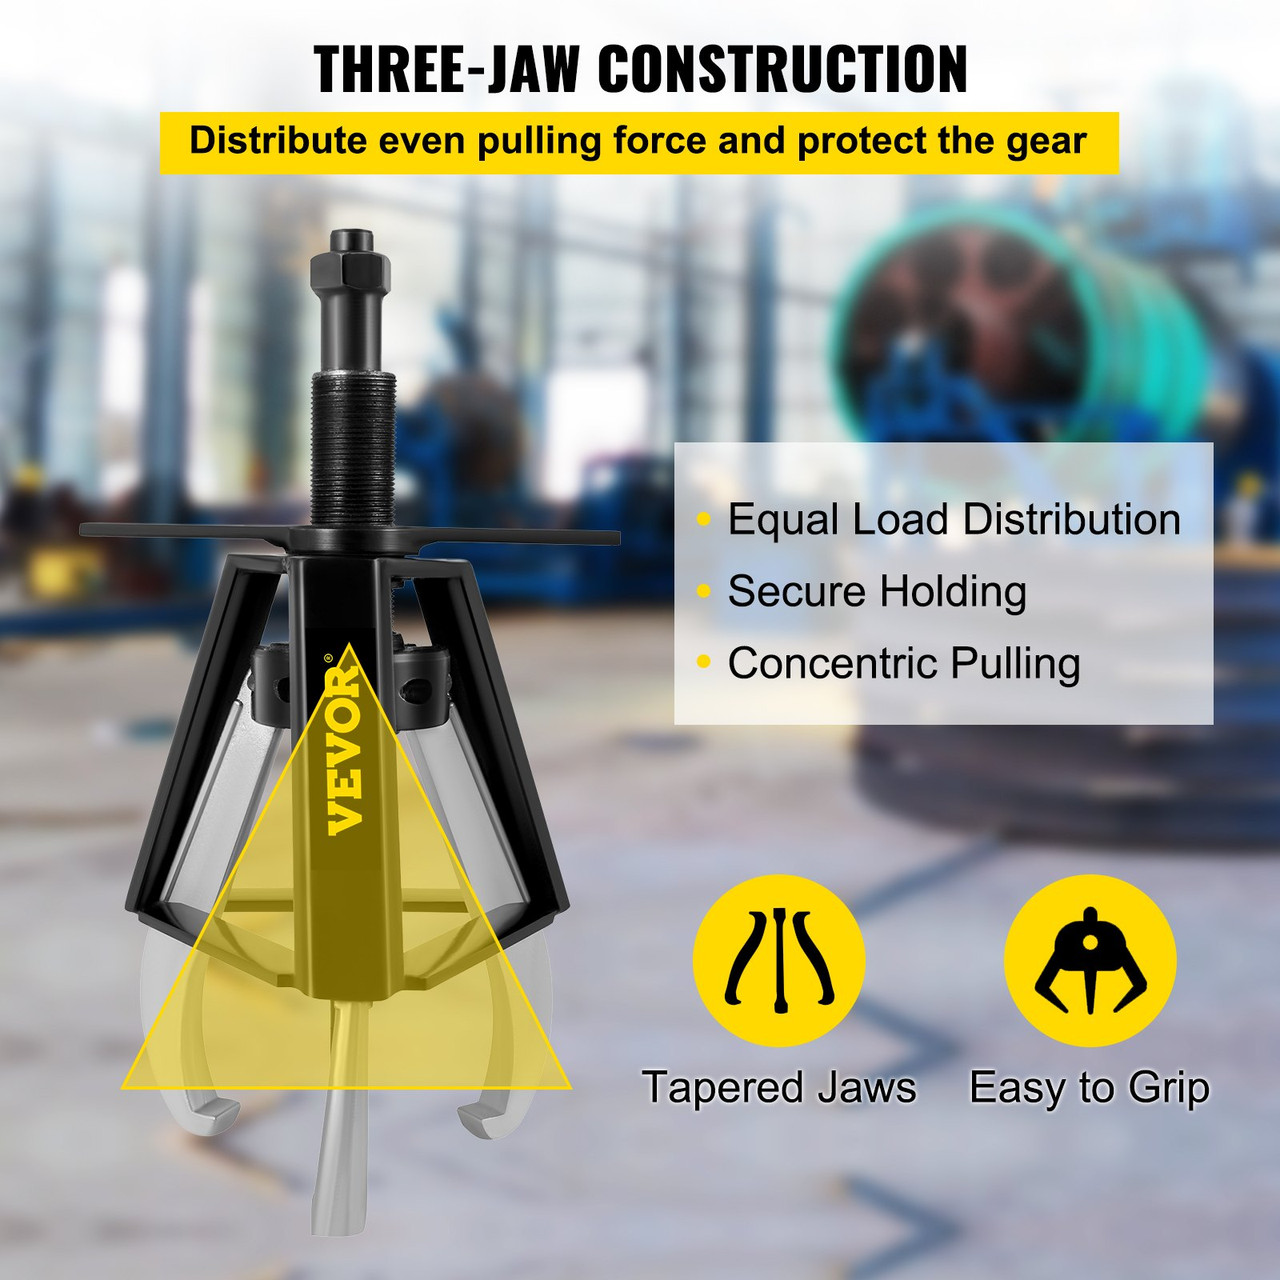 3 Jaw Gear Puller, 10 Ton/22040 LBS Capacity Manual Puller,11" -16.3" Spread Reach and 4.4"- 9.8" Spread Range, 14.5" Lead Screw Length Gear Removal Tools For Slide Gears, Pulleys, and Flywheels